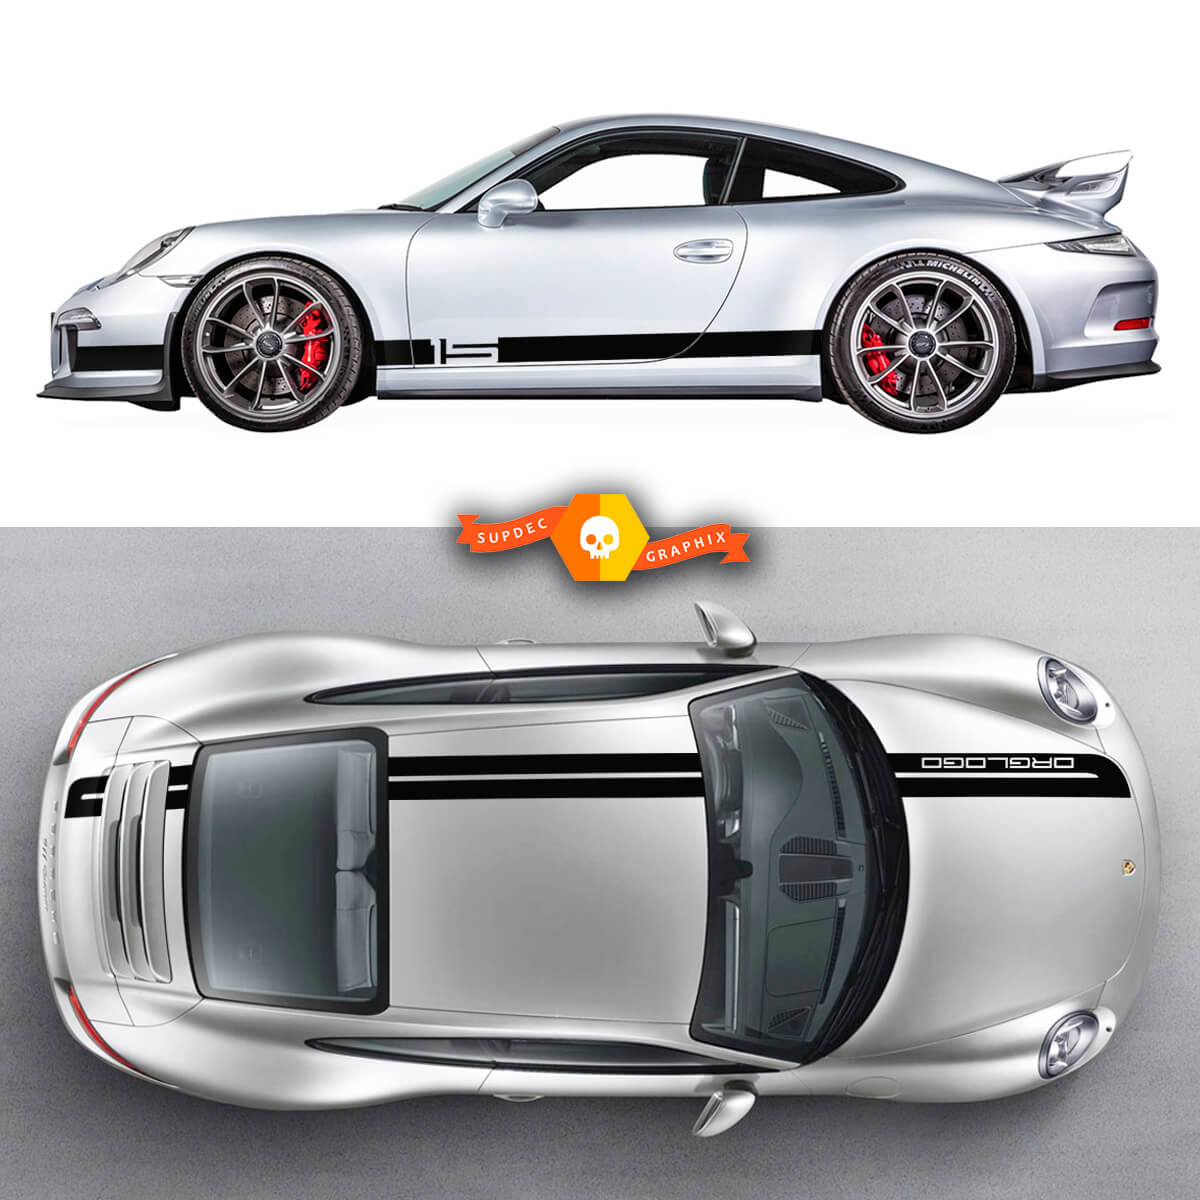 2 Porsche Sport Cup Edition Edition Stripes Racing Stripes Carrera Roof Stripes Doors Kit Decal Sticker